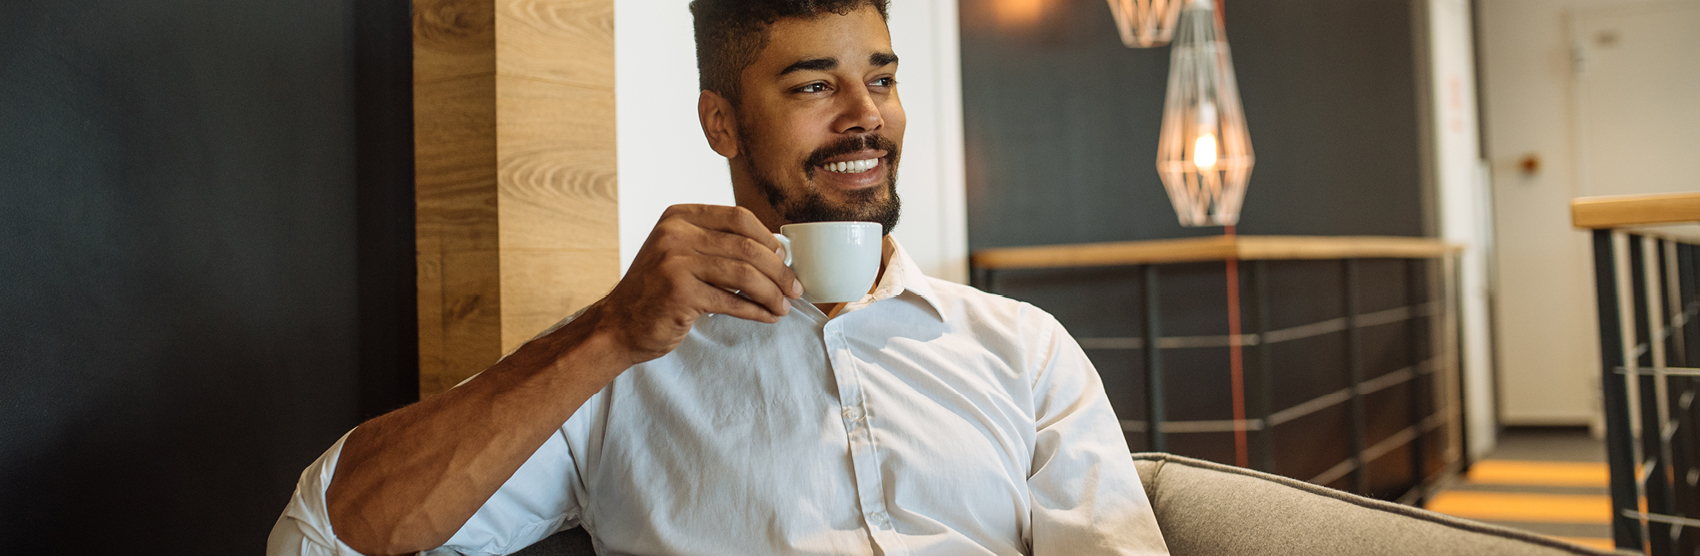 Young man drinking a cup of coffee at home